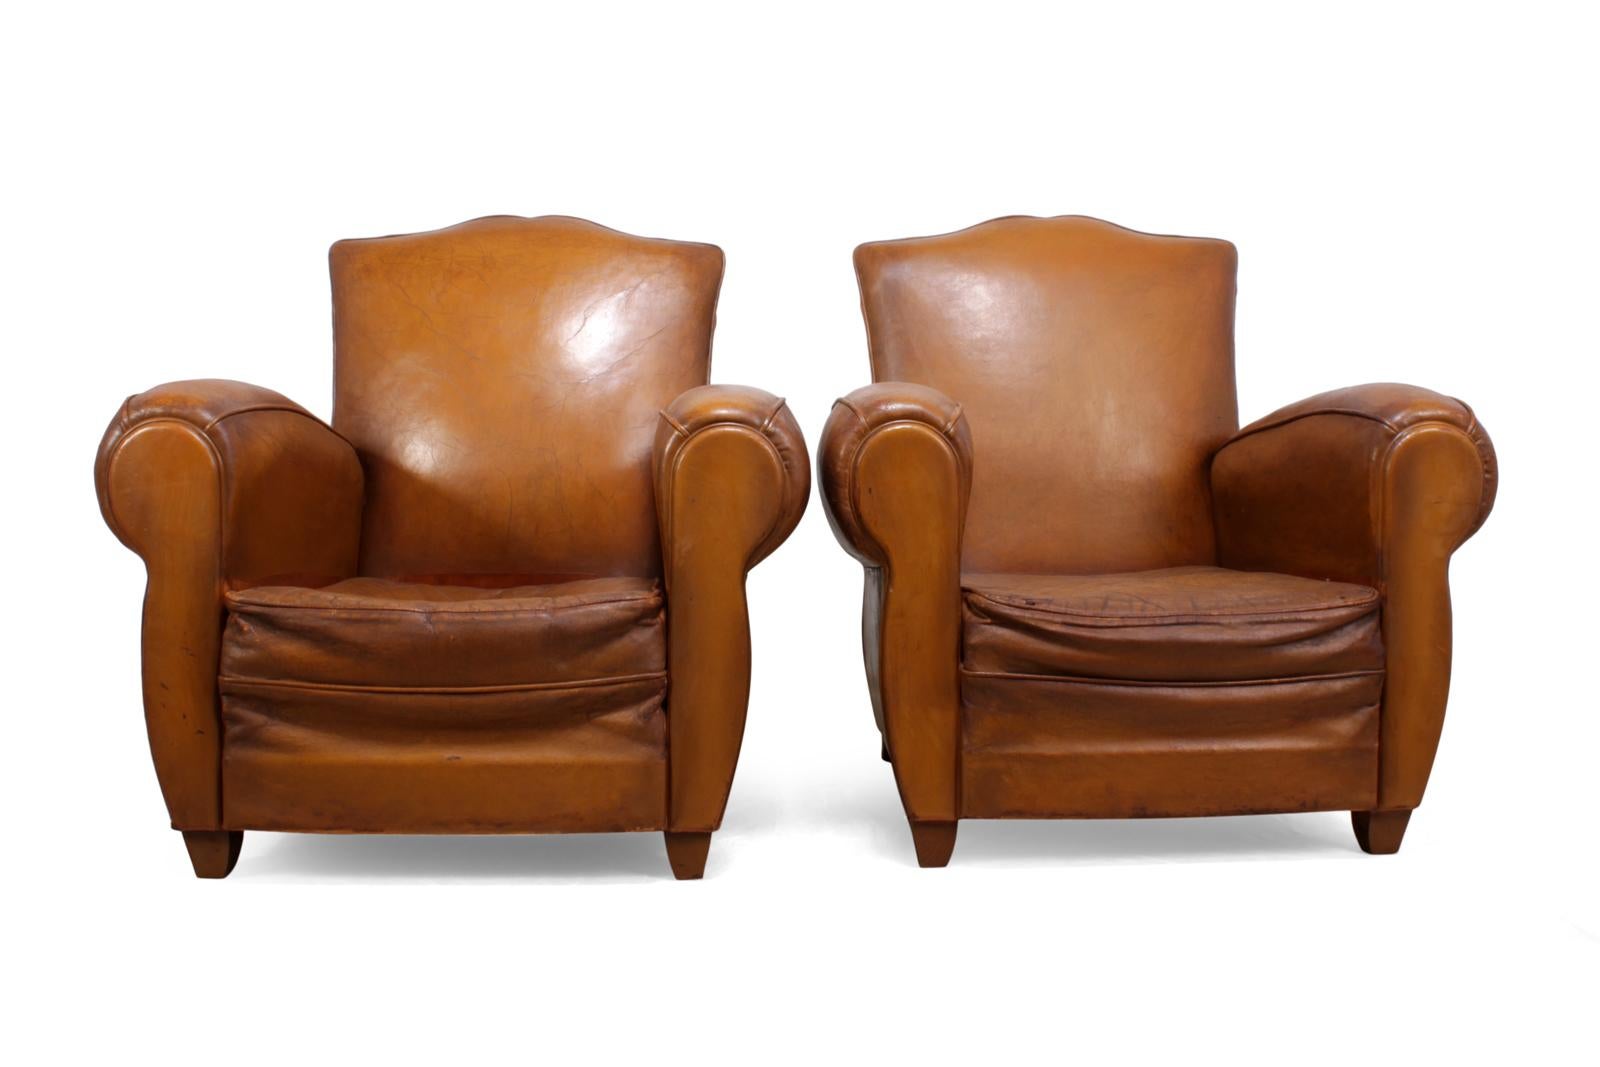 Mid-20th Century Pair of French Leather Club Chairs, circa 1940